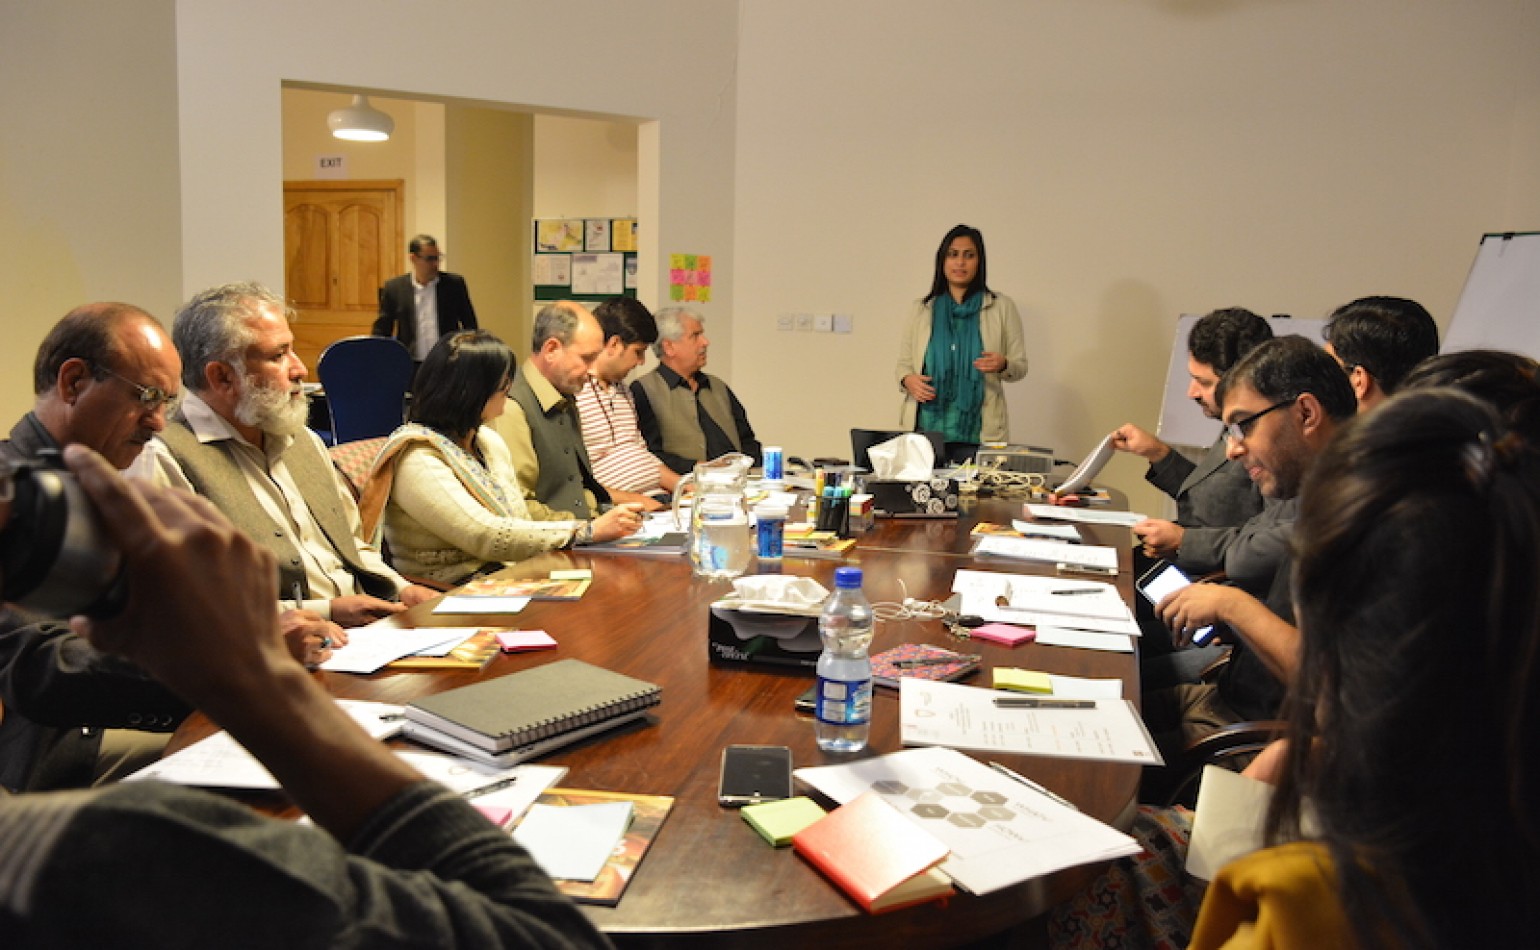 Media Matters for Democracy hosts a Design Thinking Workshop to finalise ‘Muhafiz’, a digital solution for protection of journalists